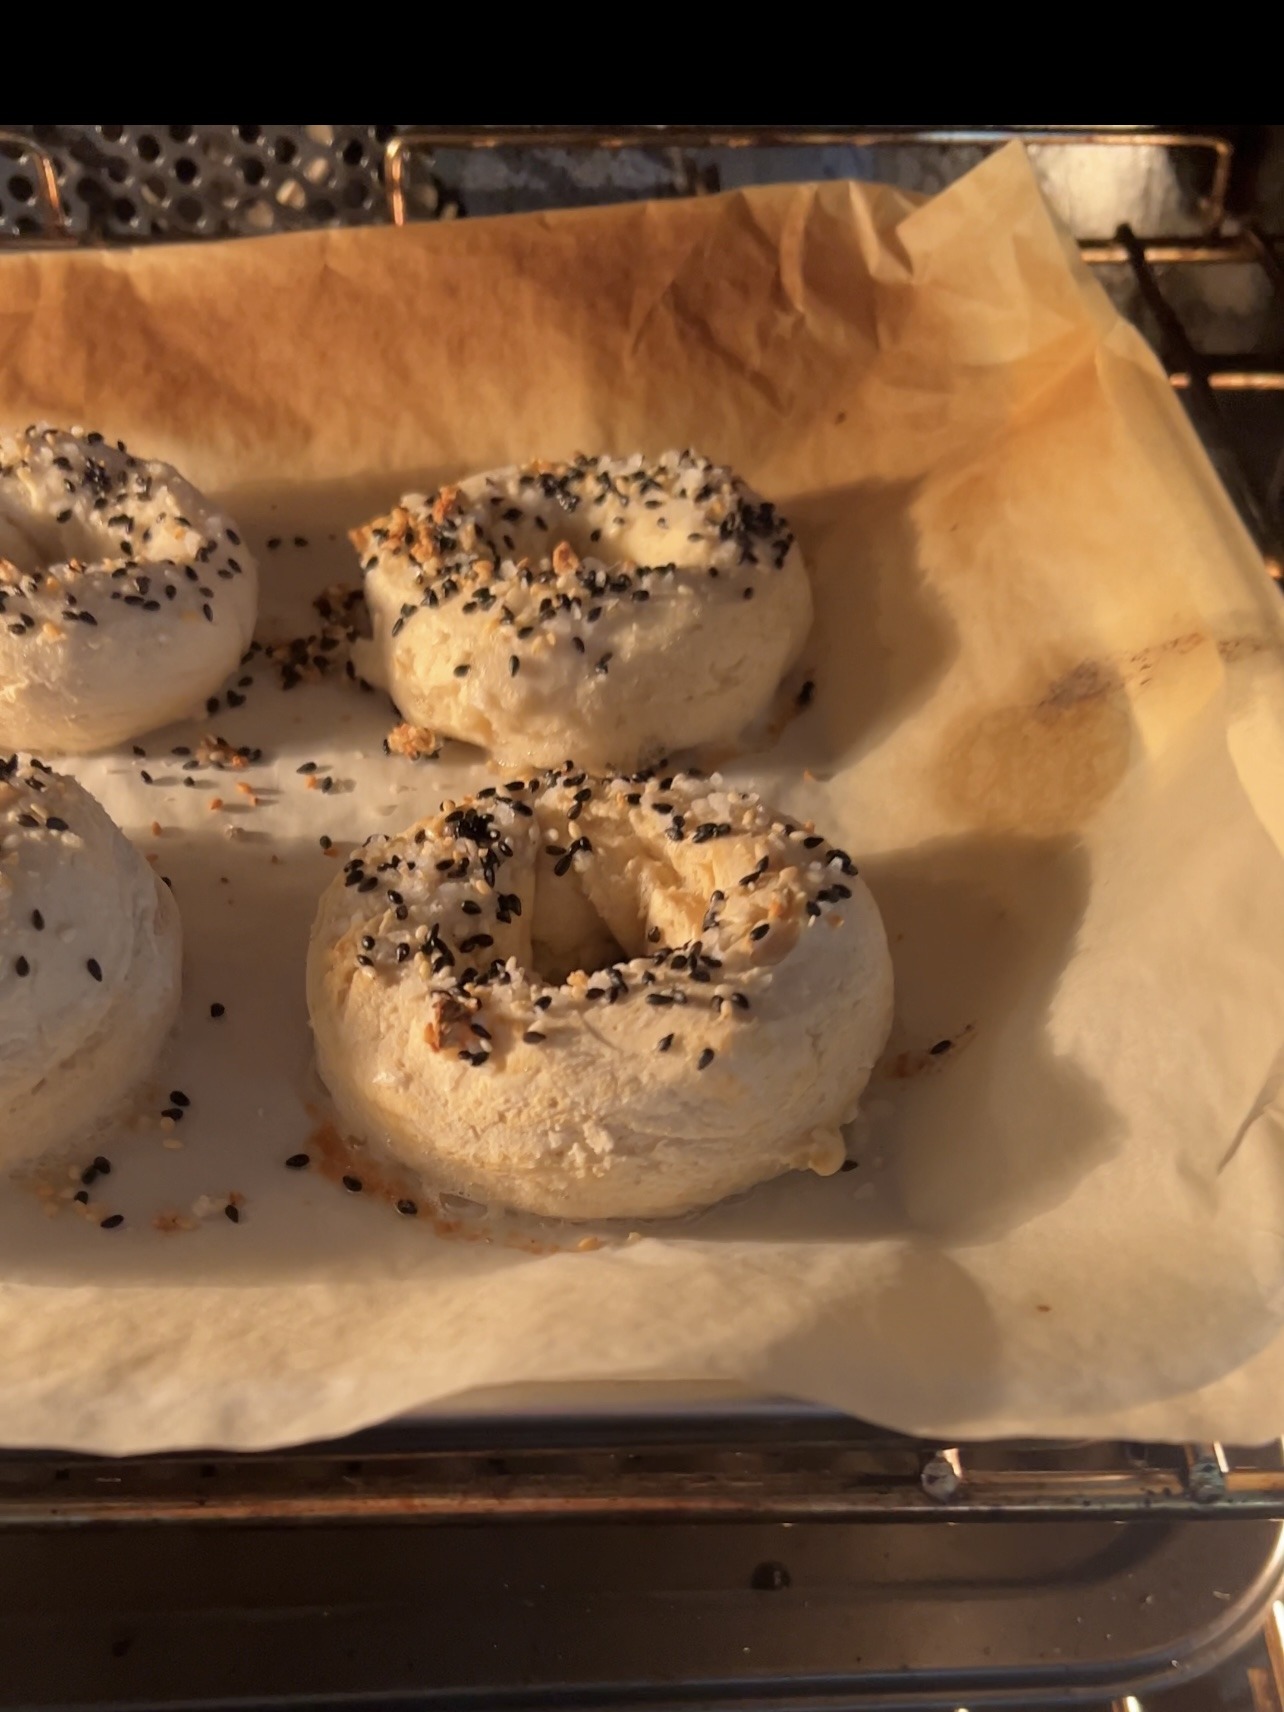 Broiling homemade bagels in the oven.